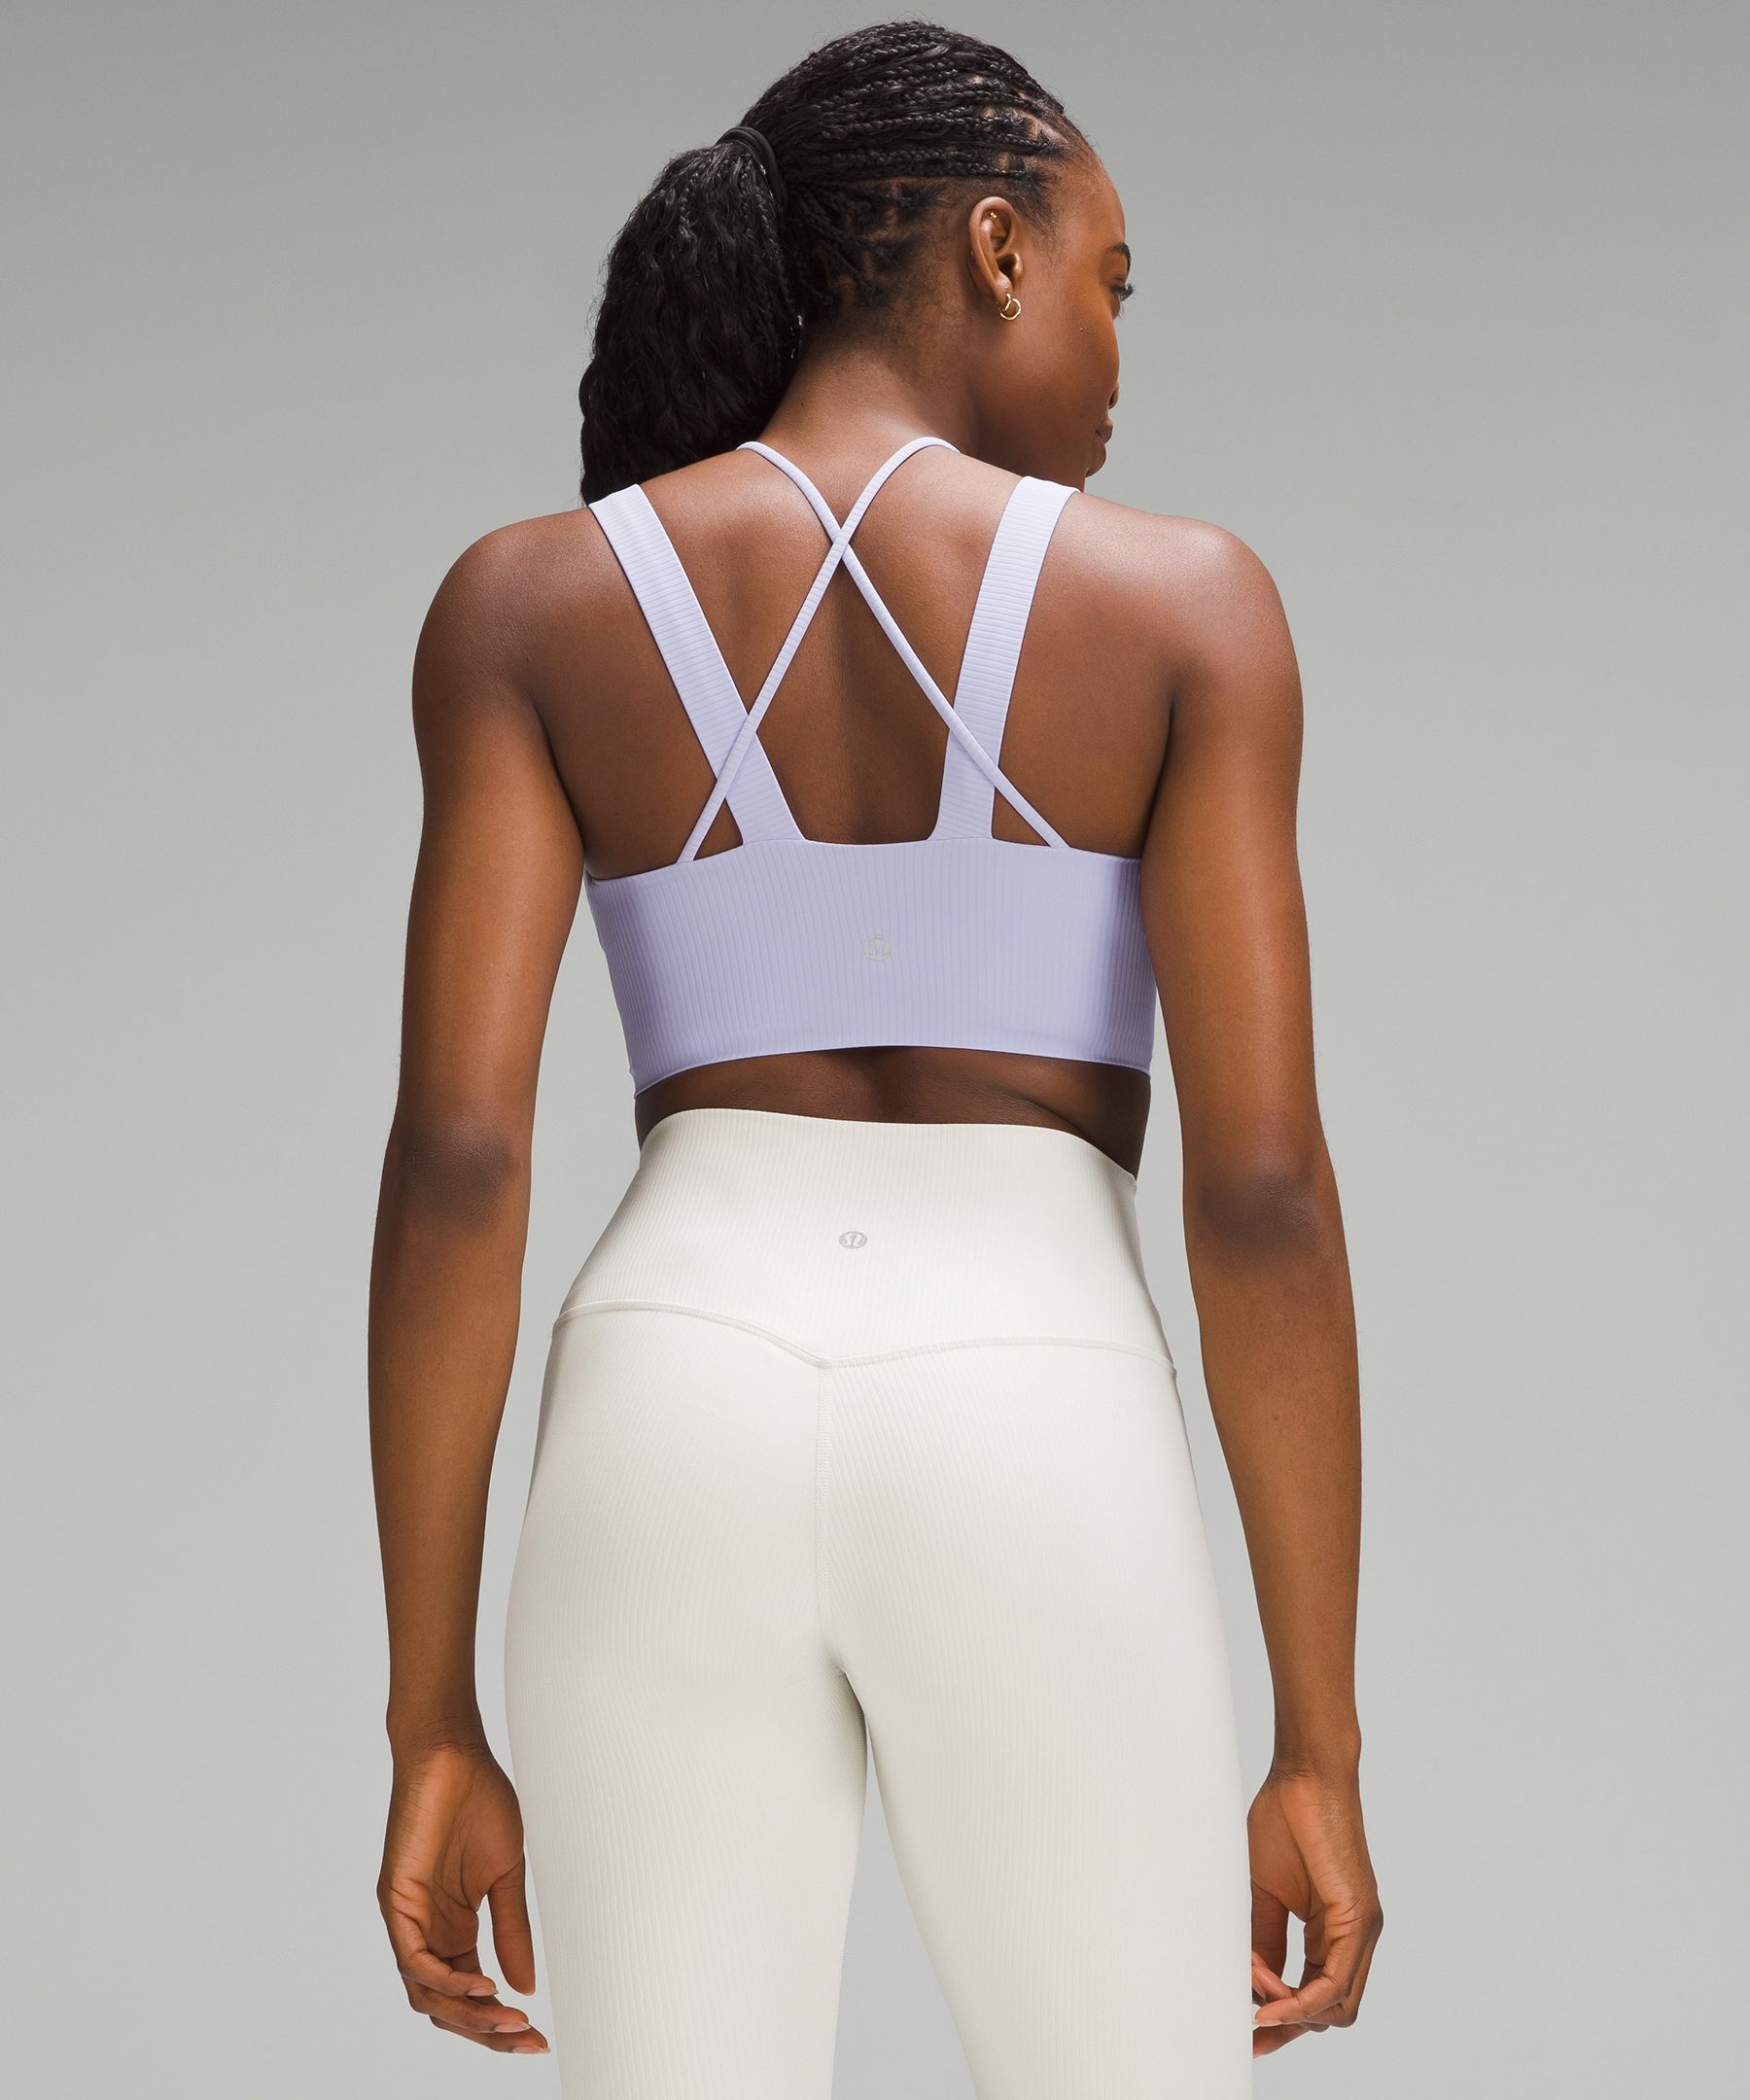 Lululemon Like a Cloud sports bra look for less from Aerie. 🔗 in